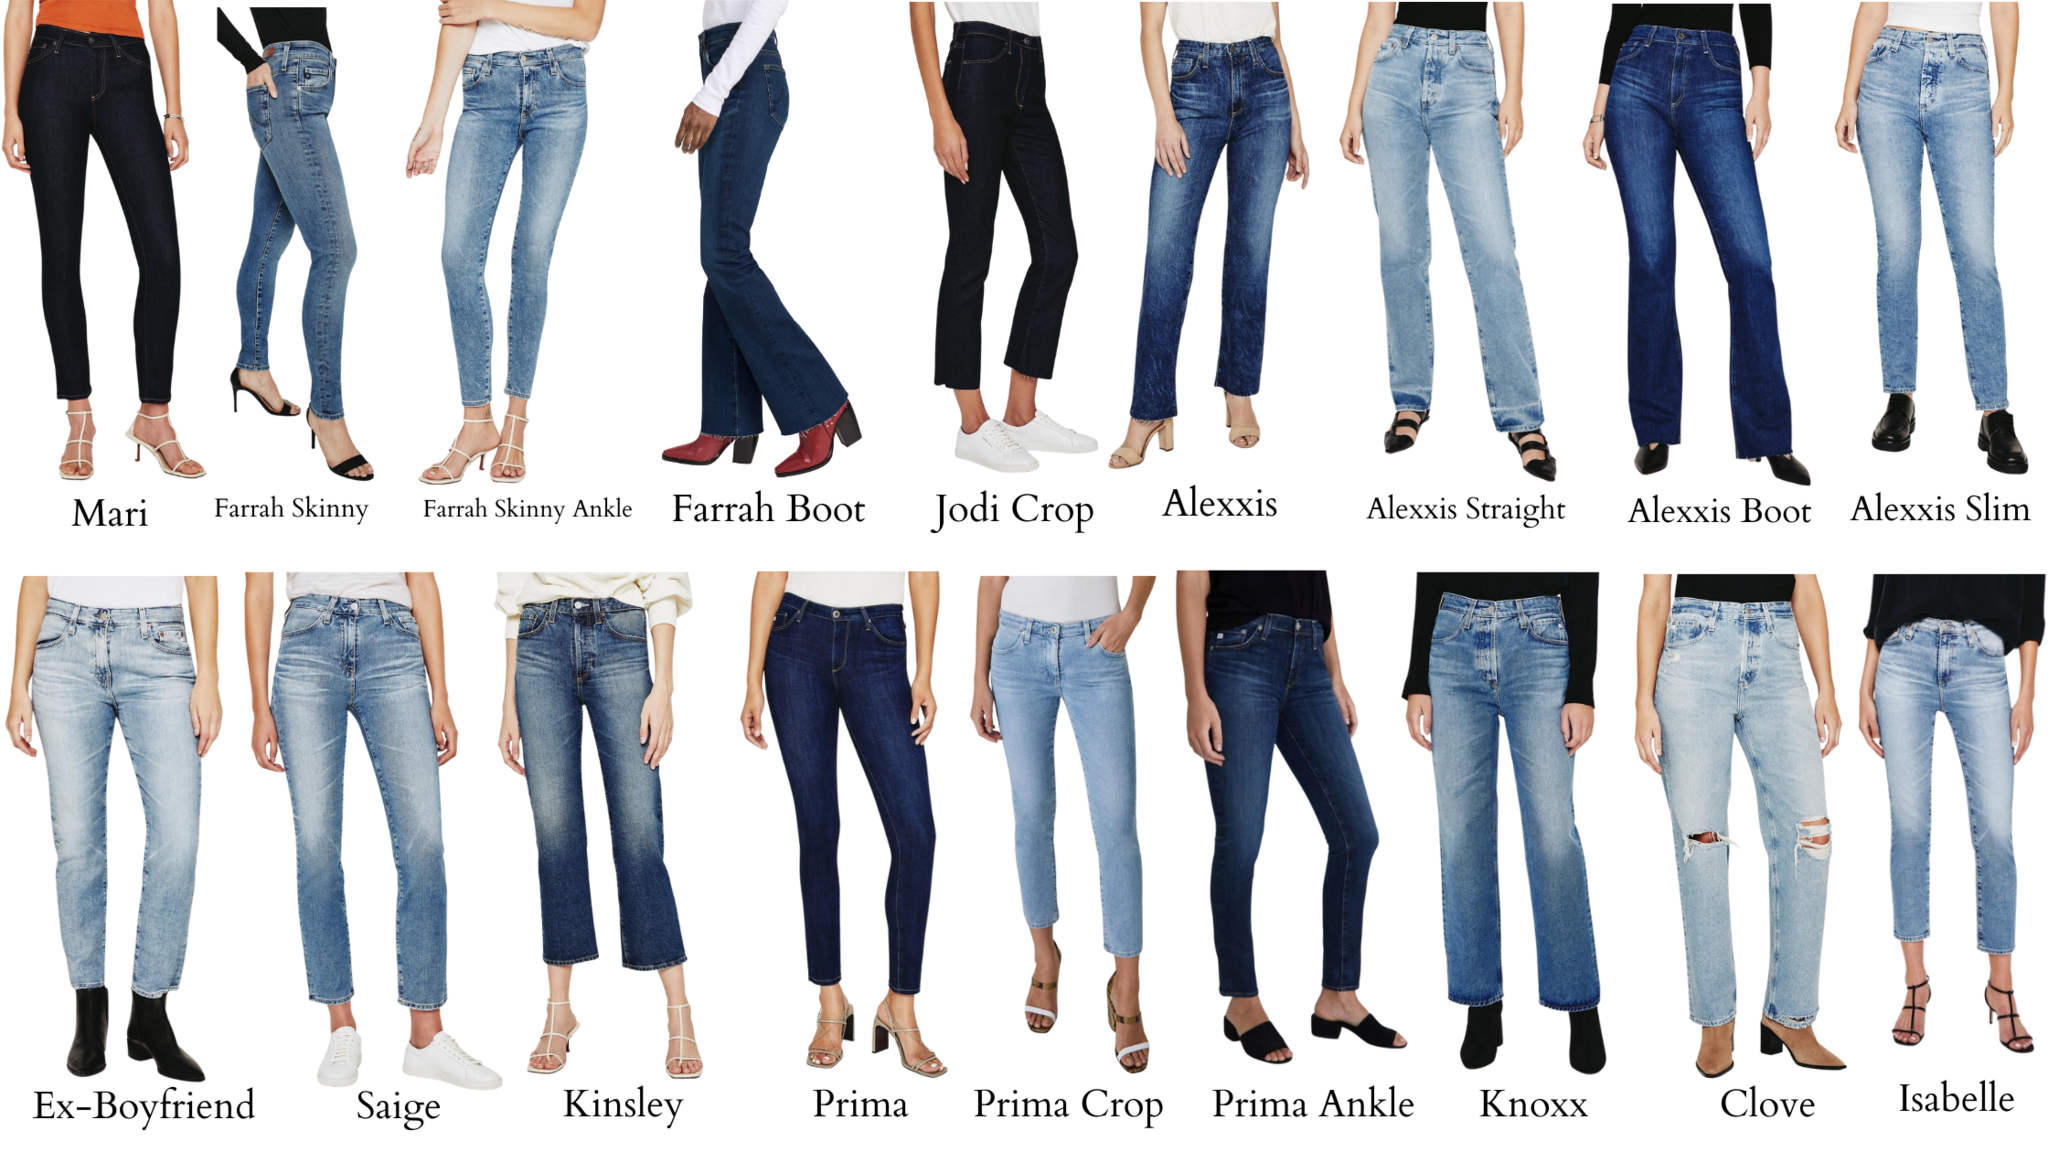 10 Types of Denim Washes and How to Wear Them | thredUP Blog